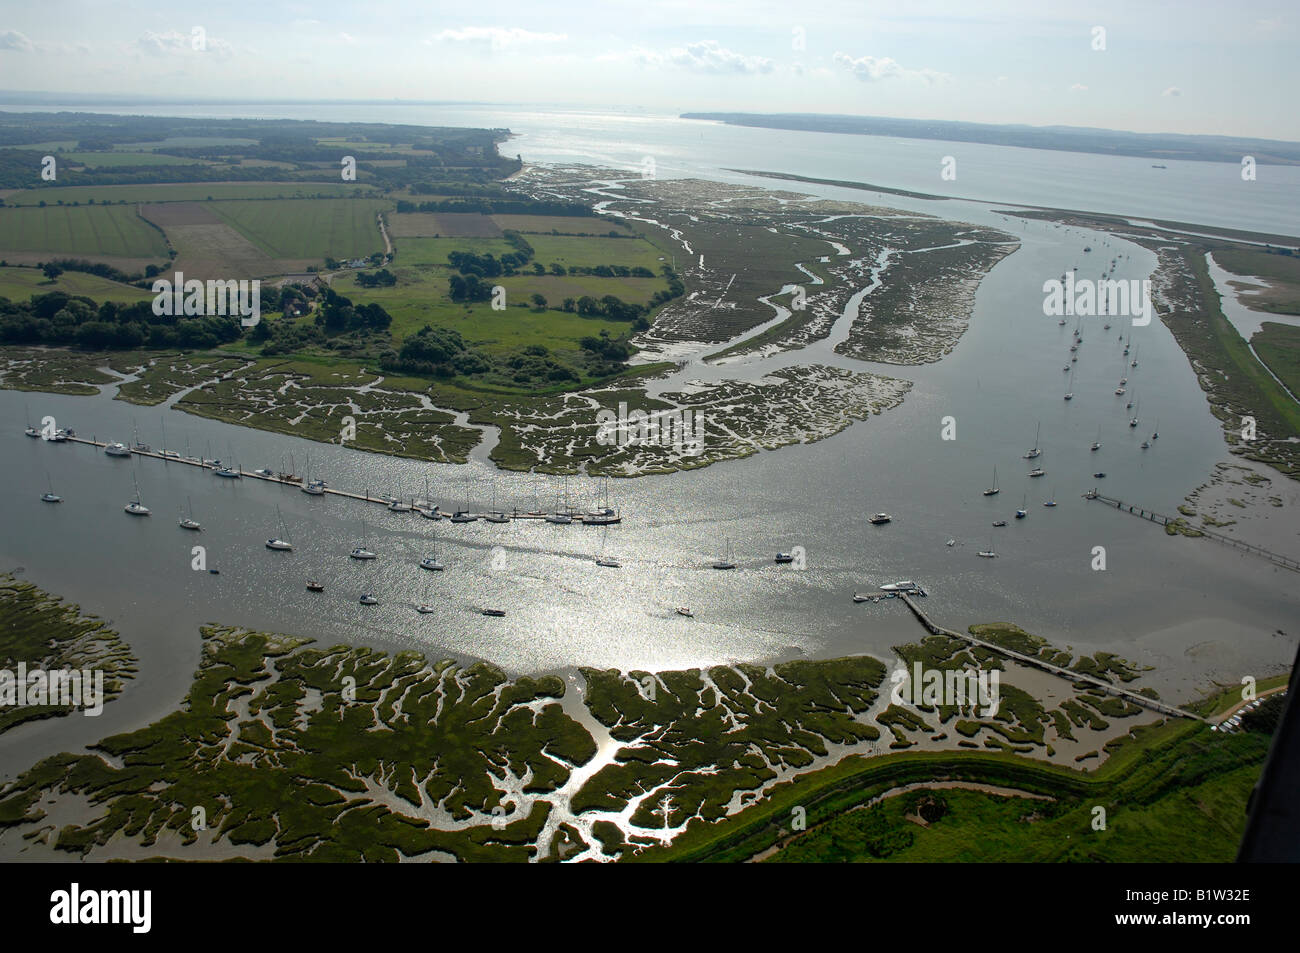 Aerial view of Moorings on the Beaulieu river looking towards the Solent. Stock Photo